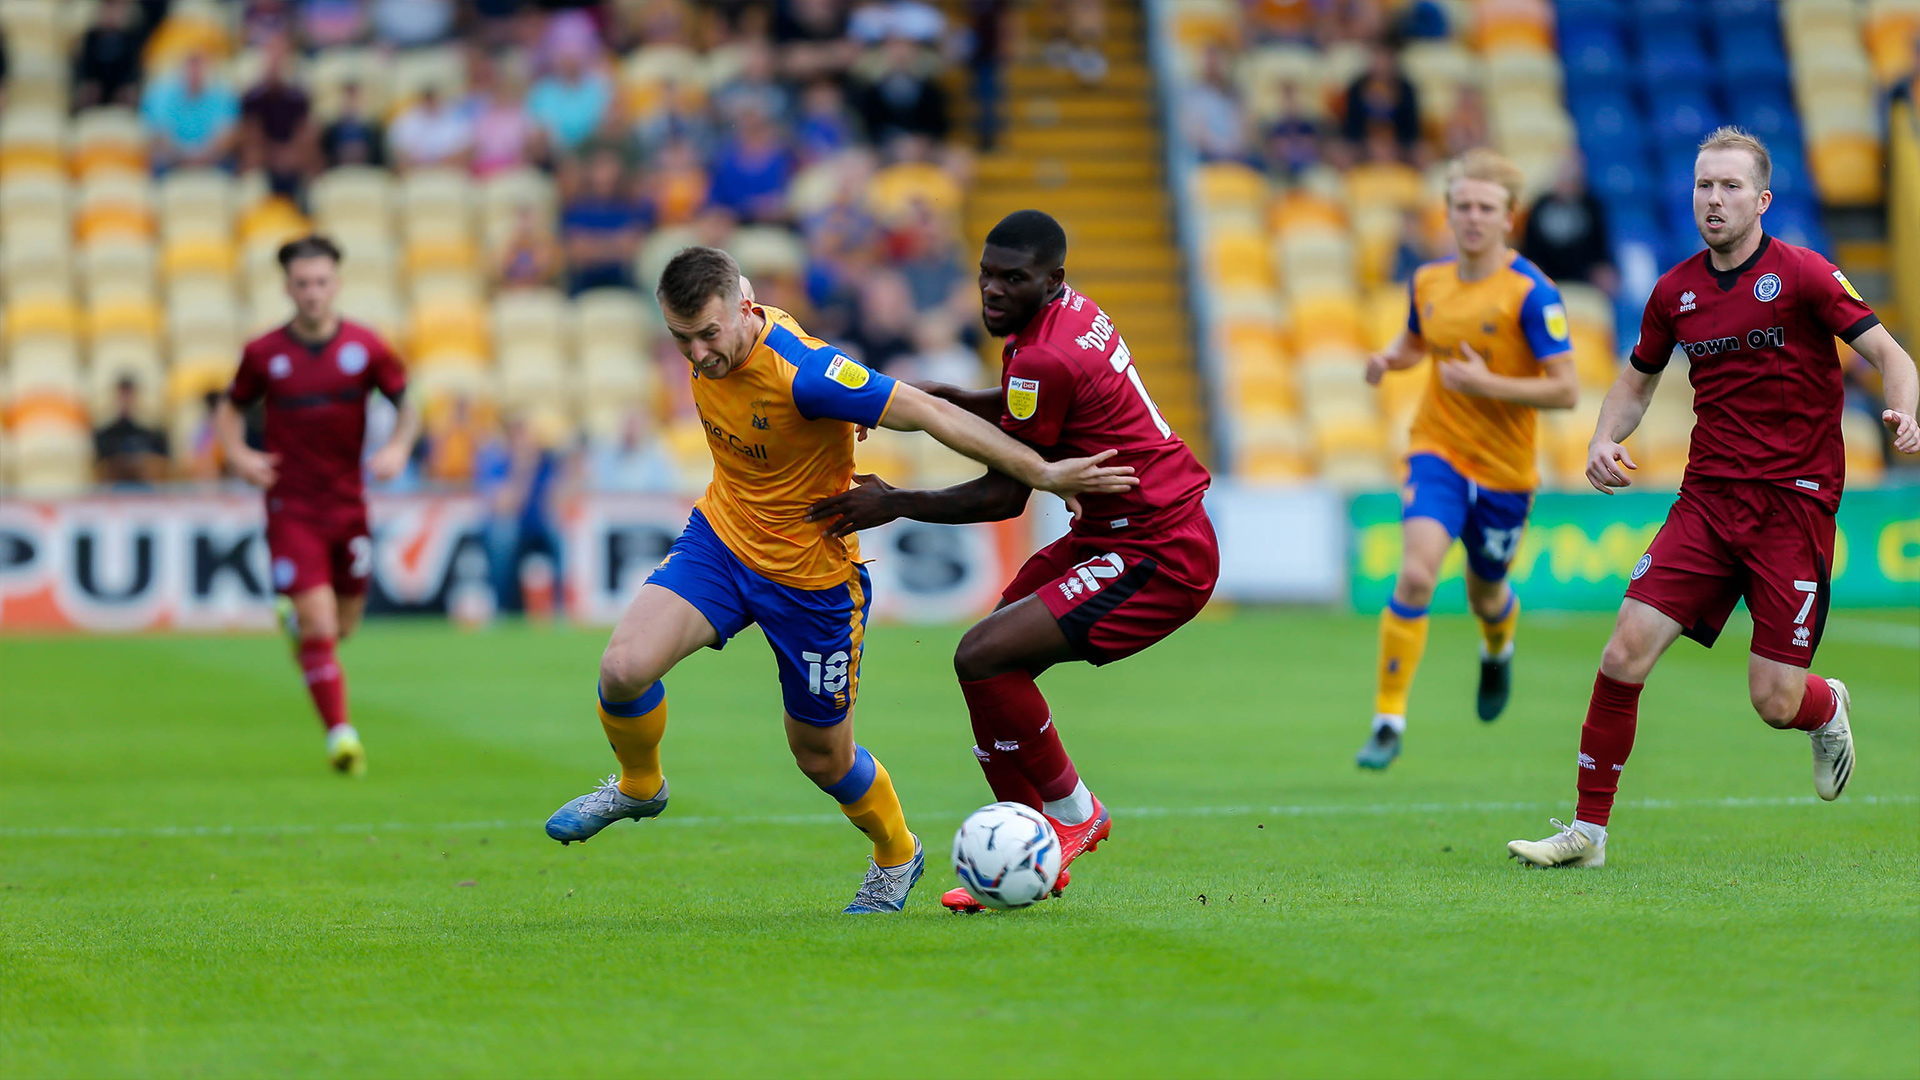 Mansfield Town vs Rochdale on 18 Sep 21 - Match Centre - Mansfield Town